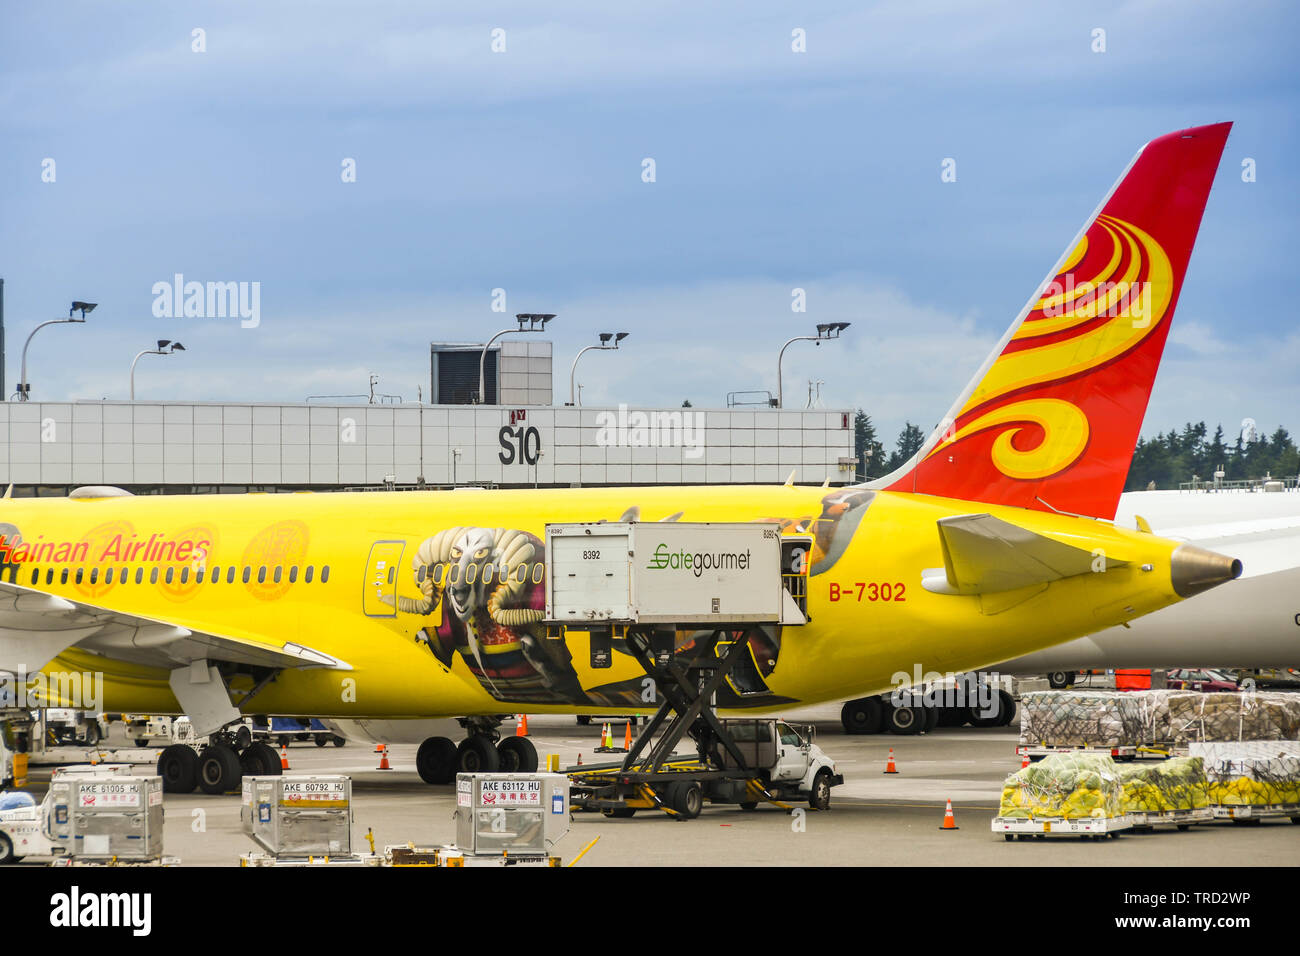 SEATTLE TACOMA AIRPORT, WA, USA - JUNE 2018: Scissor lift truck of Gate Gourmet loading catering onto a Hainan Airlines jet at Seattle Tacoma airport Stock Photo